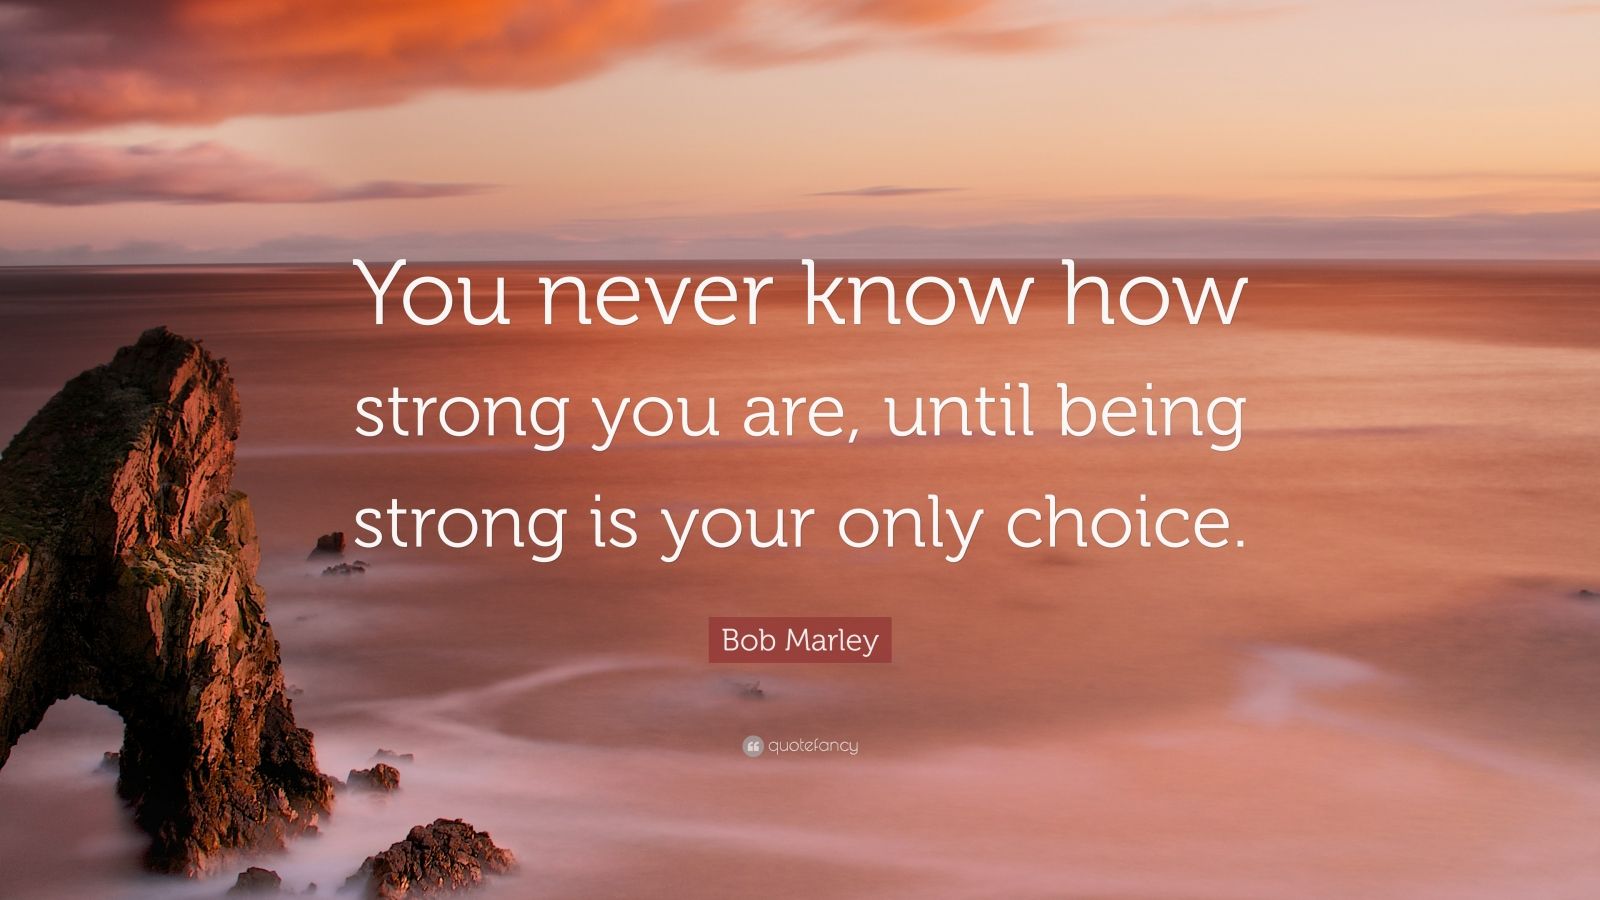 Bob Marley Quote: "You never know how strong you are ...